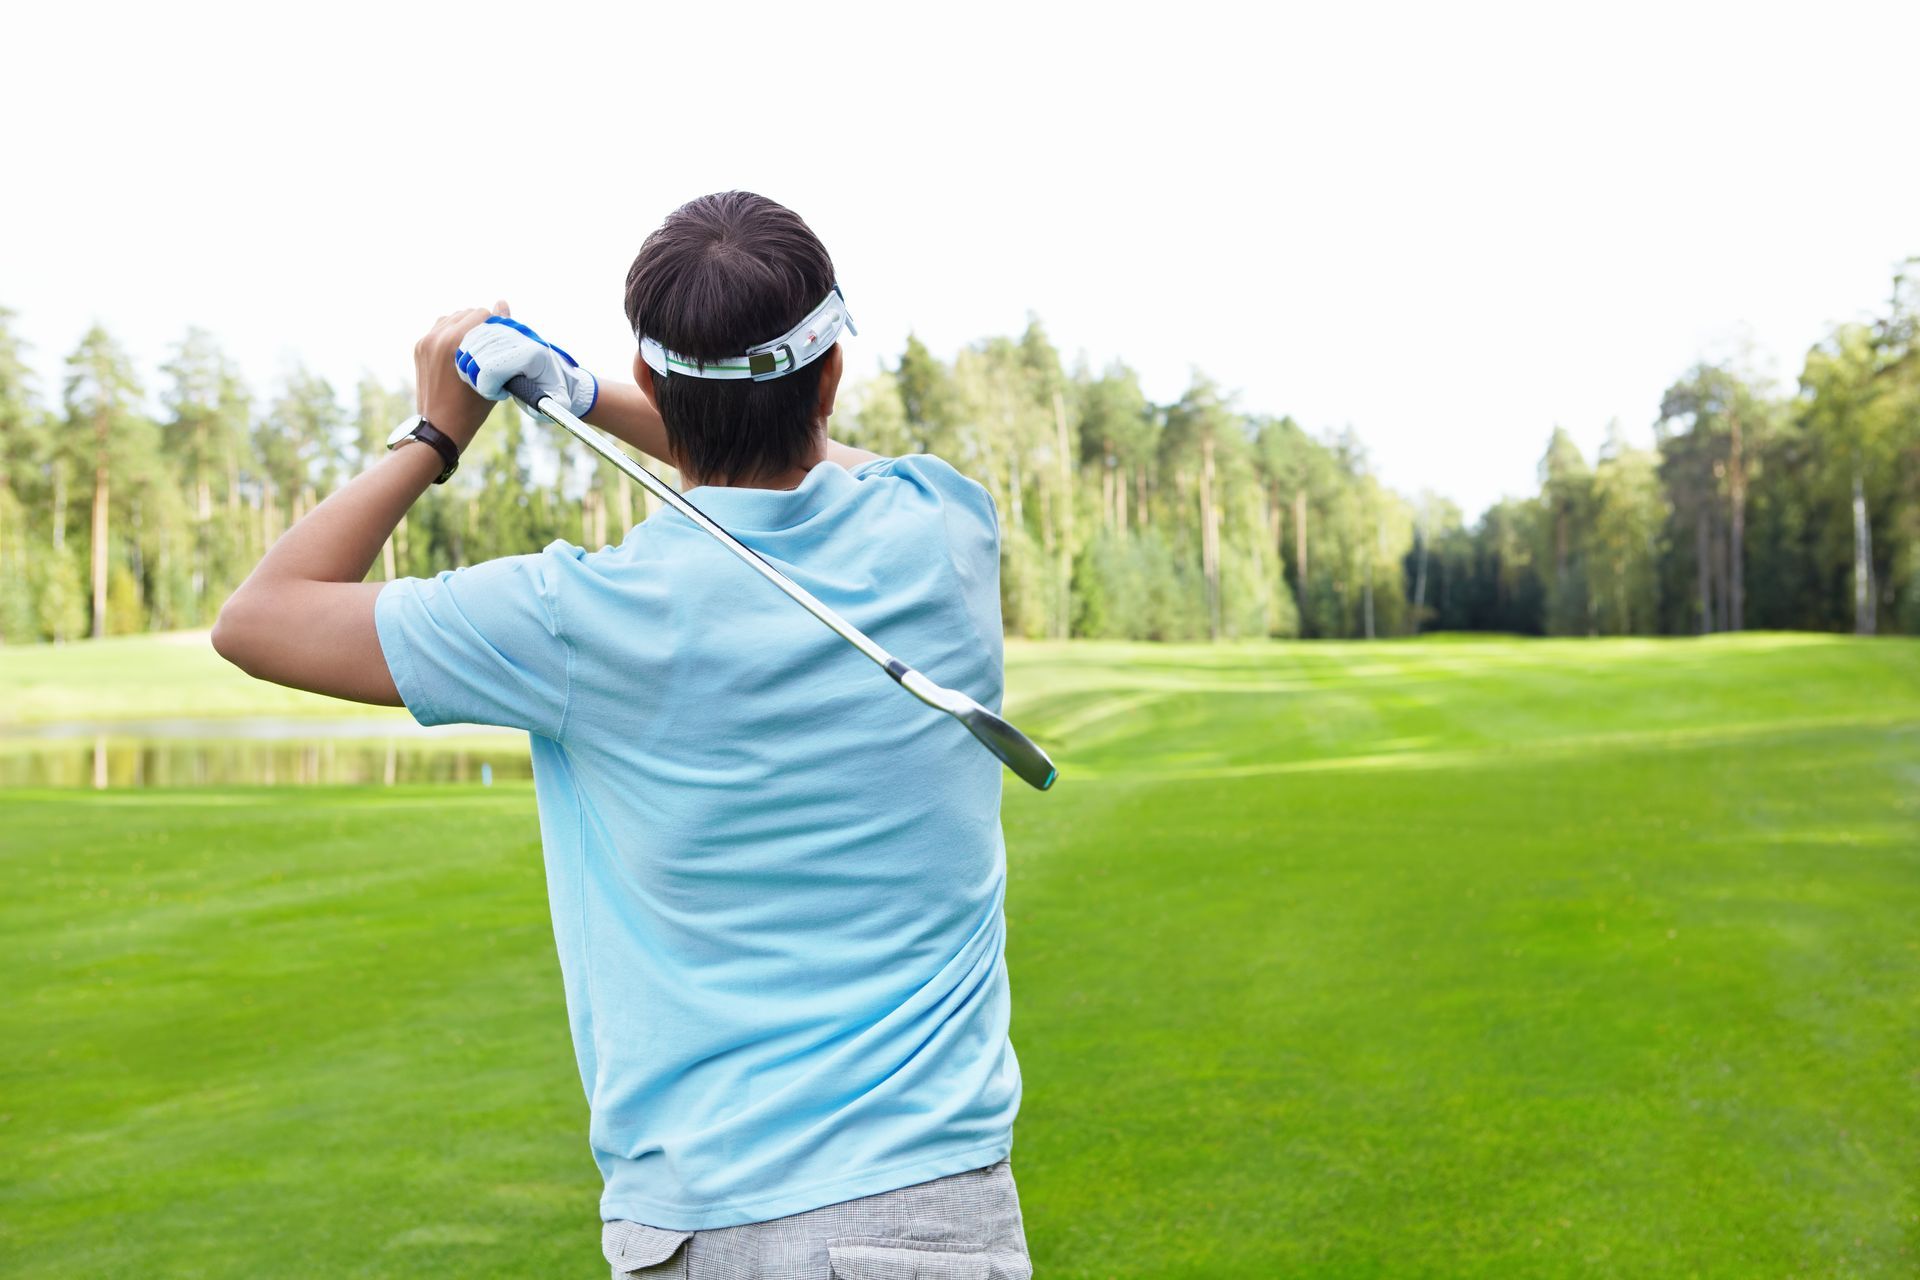 Playing Golf with proper physiotherapy improves performance